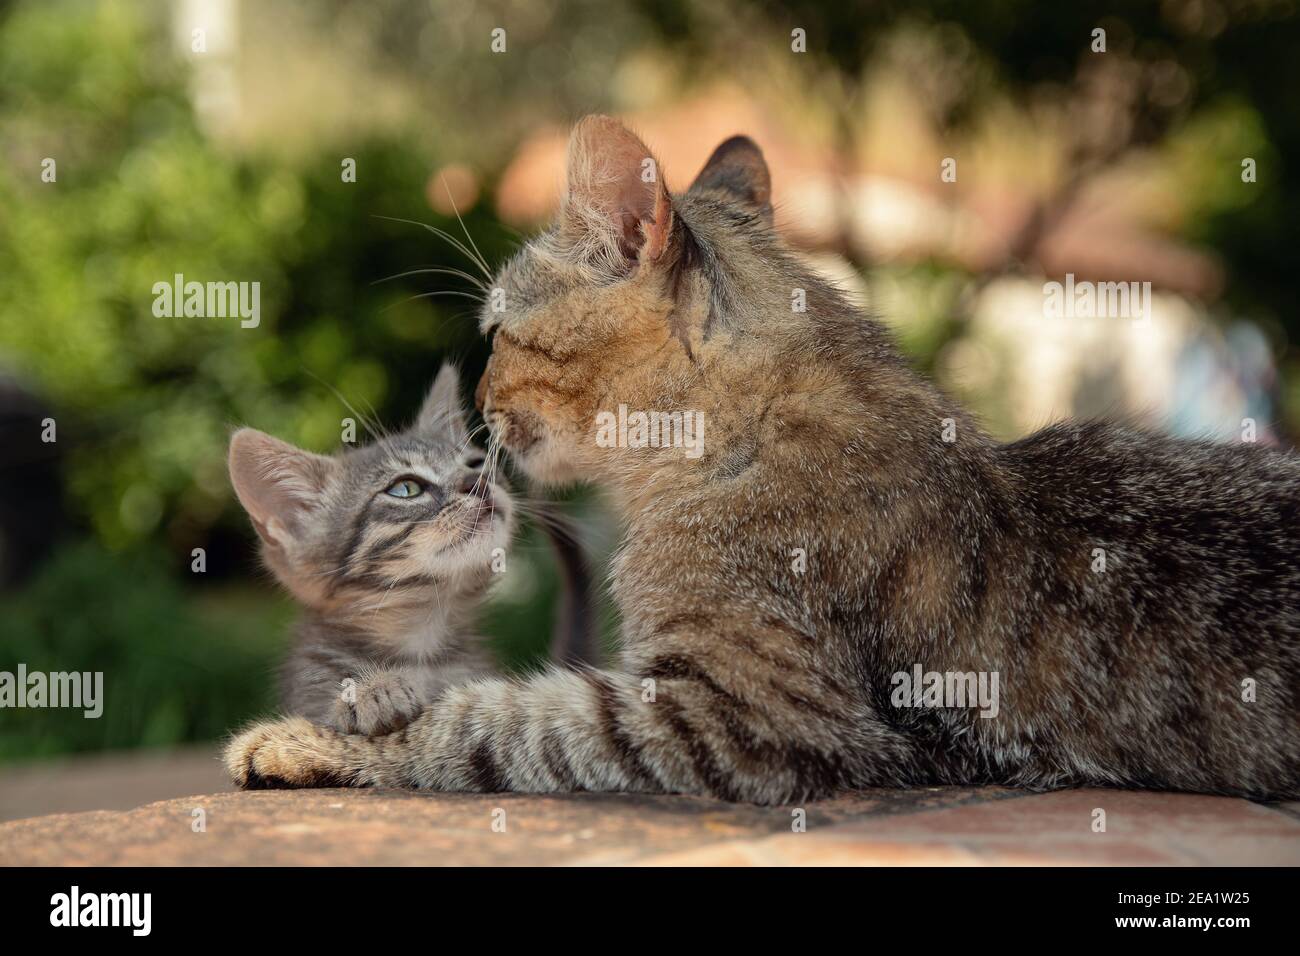 Mother cat shows affection to her small kitten Stock Photo